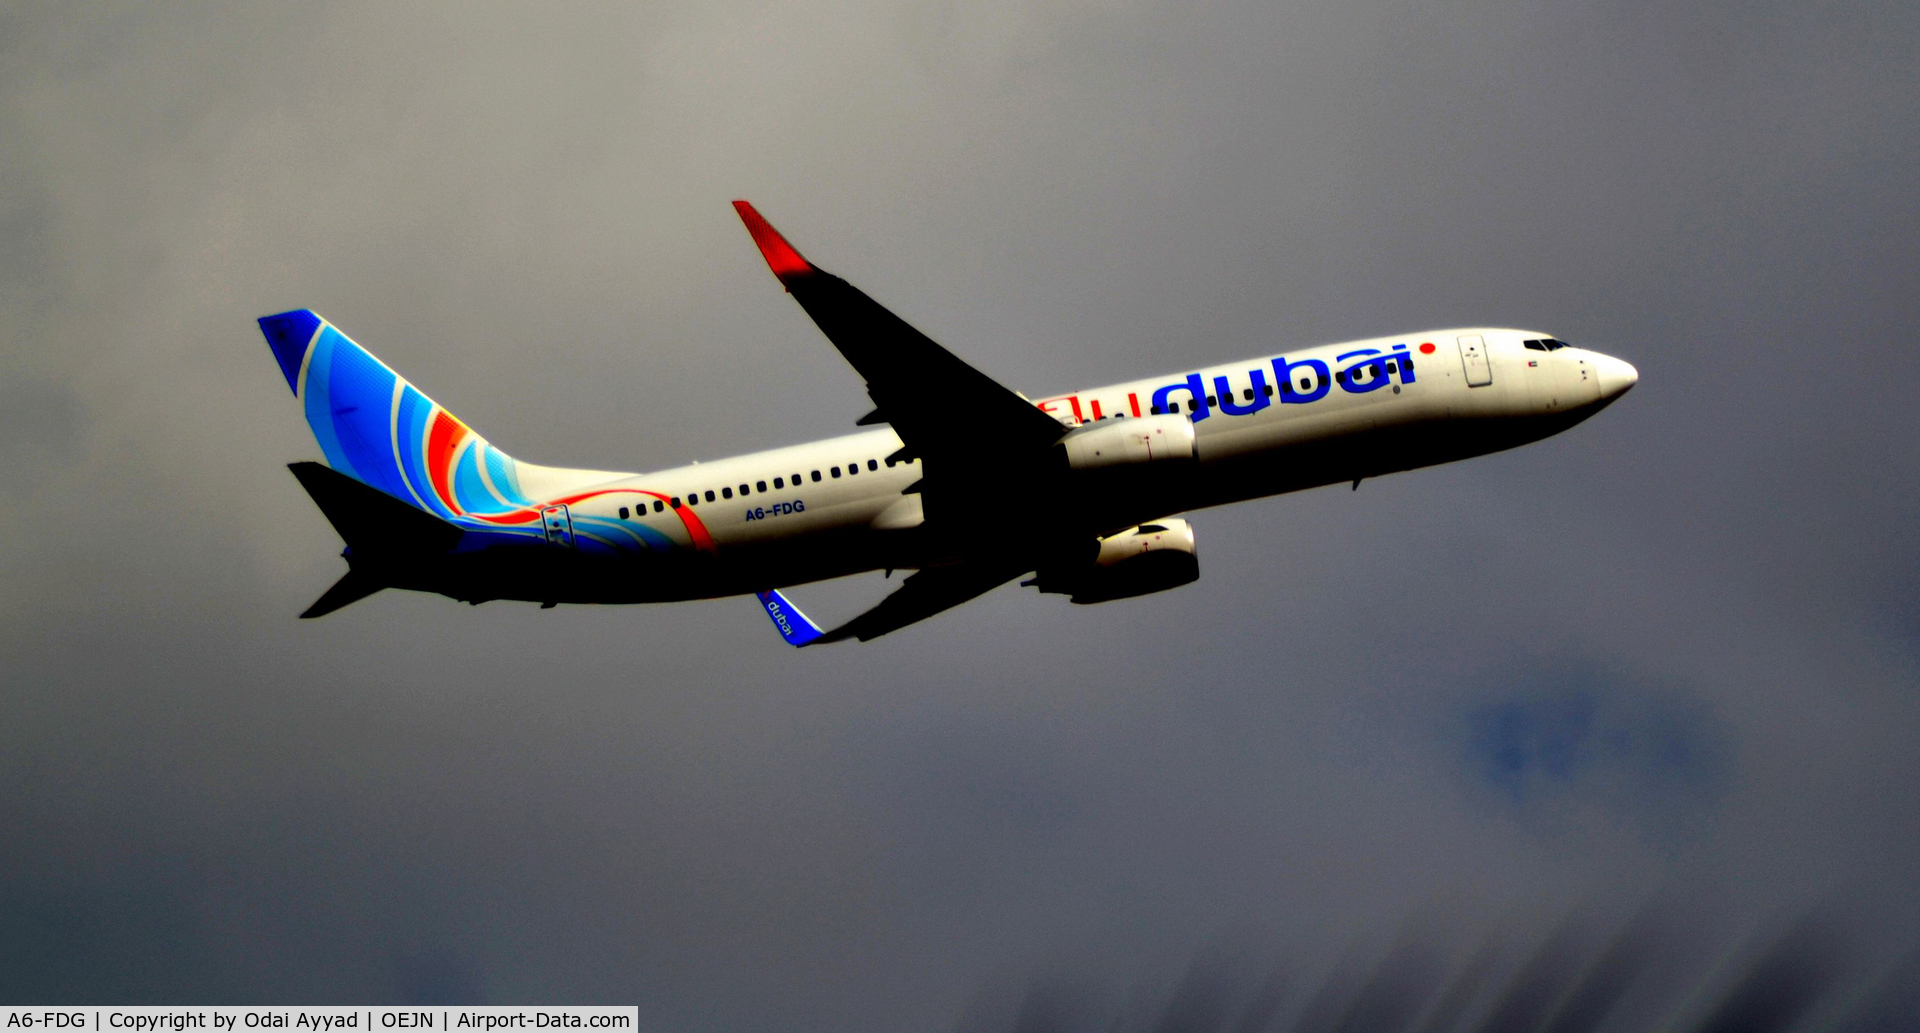 A6-FDG, 2010 Boeing 737-8KN C/N 29636, Fly Dubai  After takeoff from Jeddah